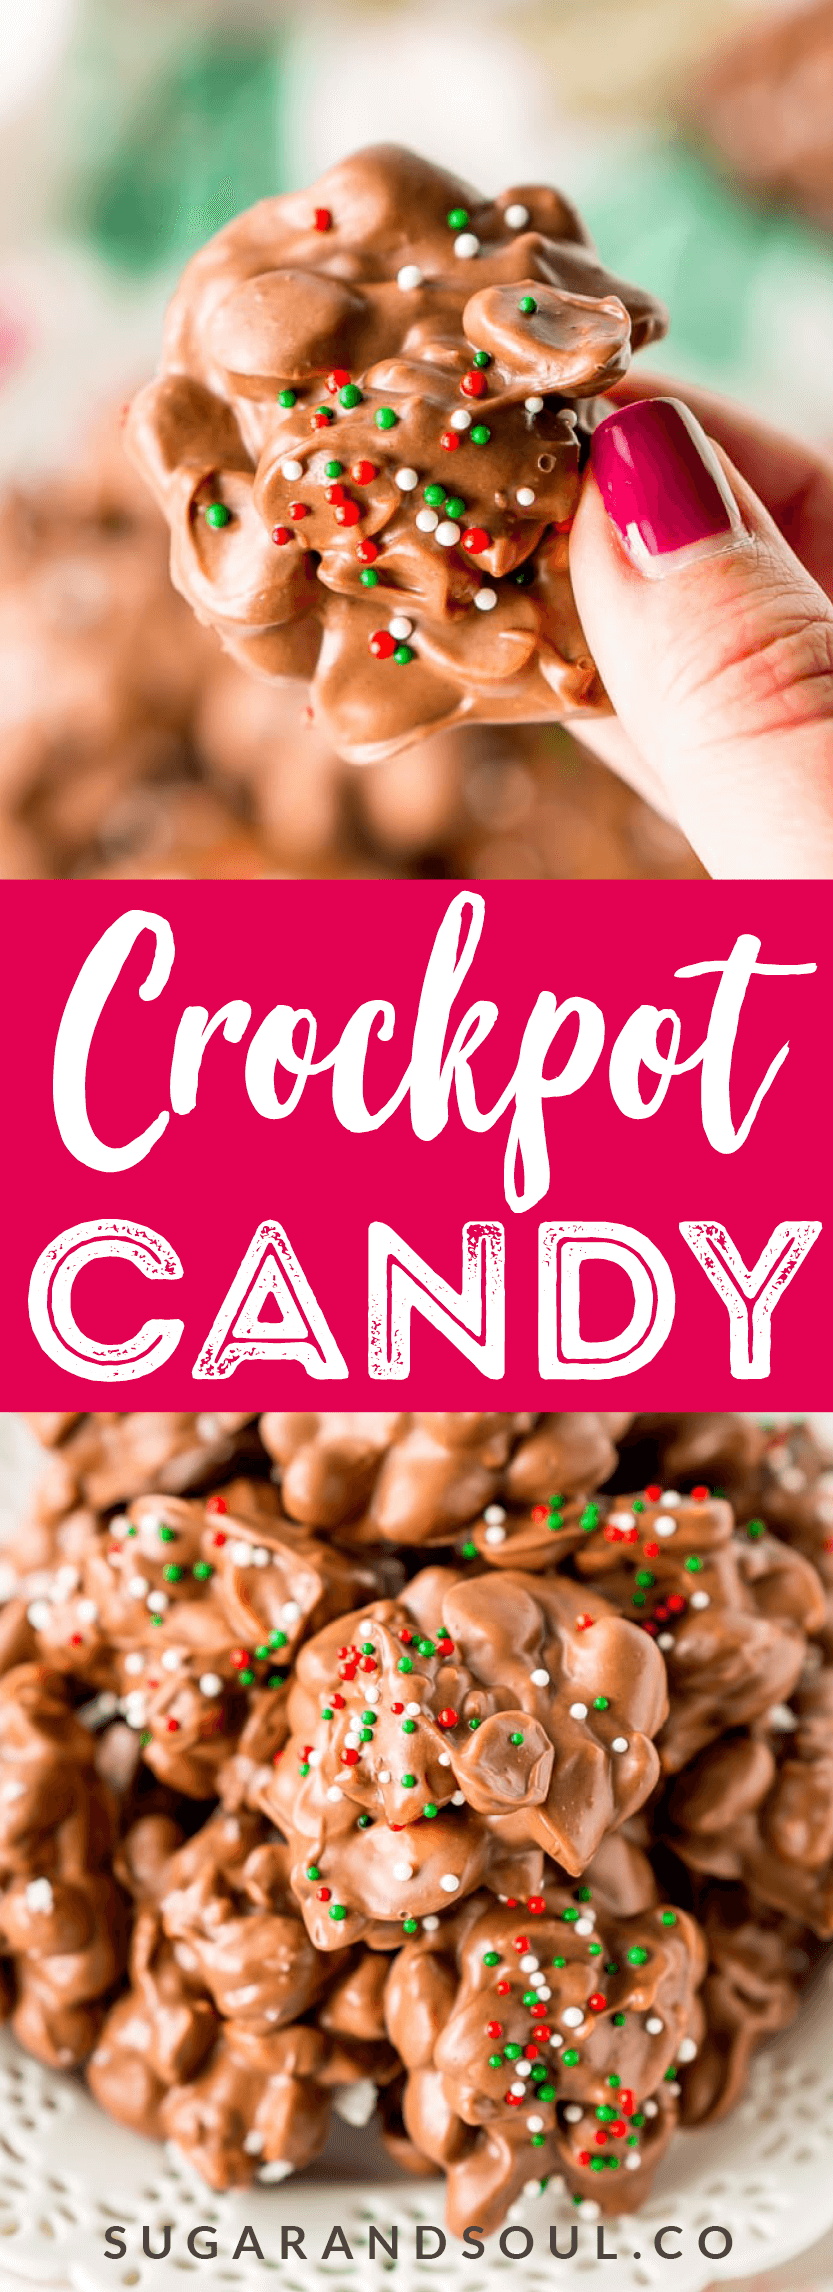 Crockpot Candy is an easy recipe loaded with peanuts, almond bark, and lots of chocolate and super simple to make in the slow cooker! Topped with some festive sprinkles, this pop-in-your-mouth treat is perfect for sharing at holiday parties. via @sugarandsoulco